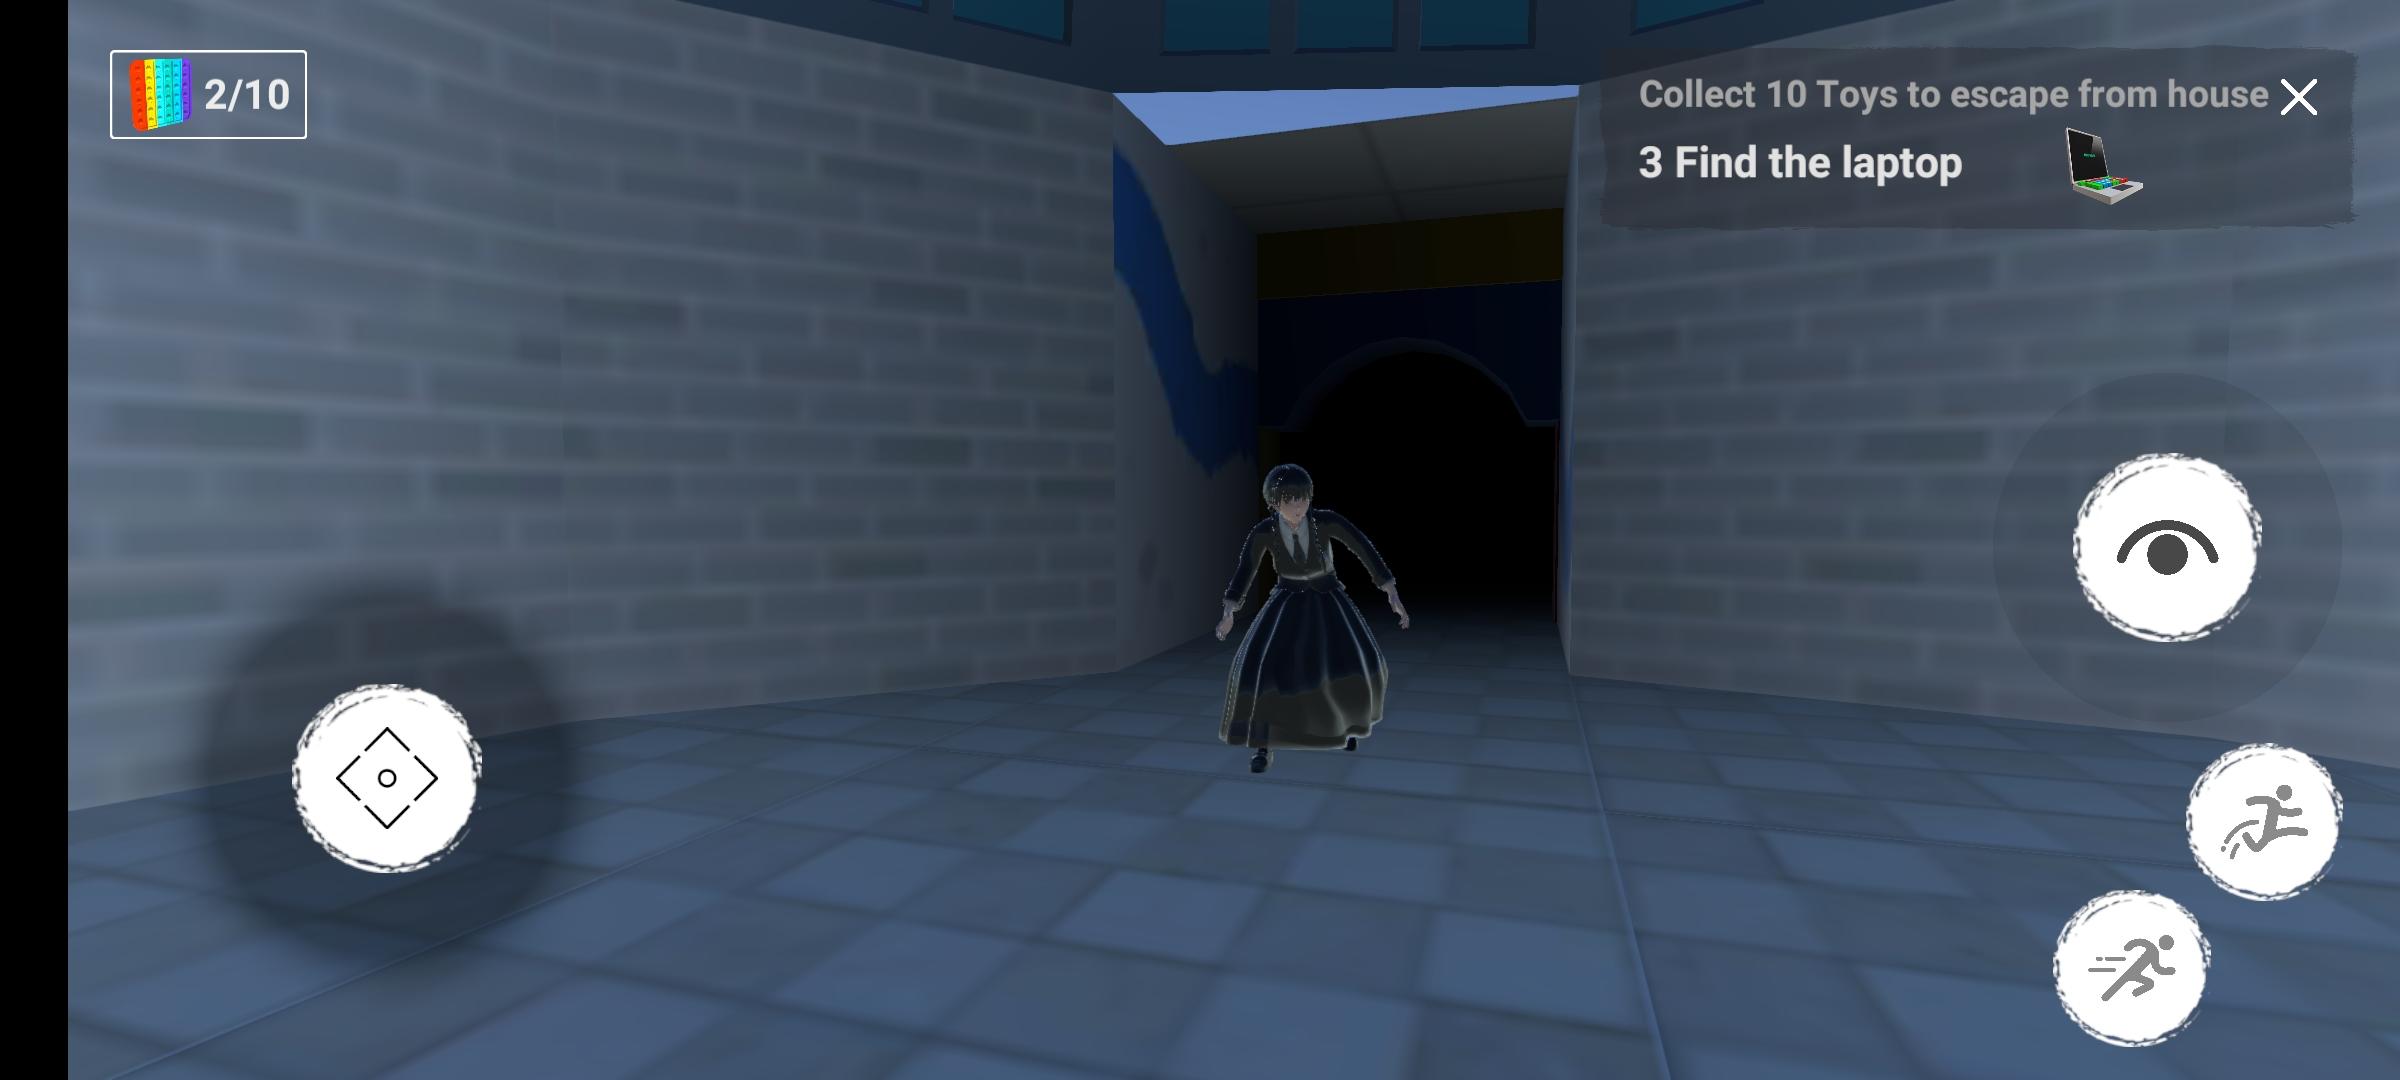 About: Wednesday Addams Game Puzzle (Google Play version)